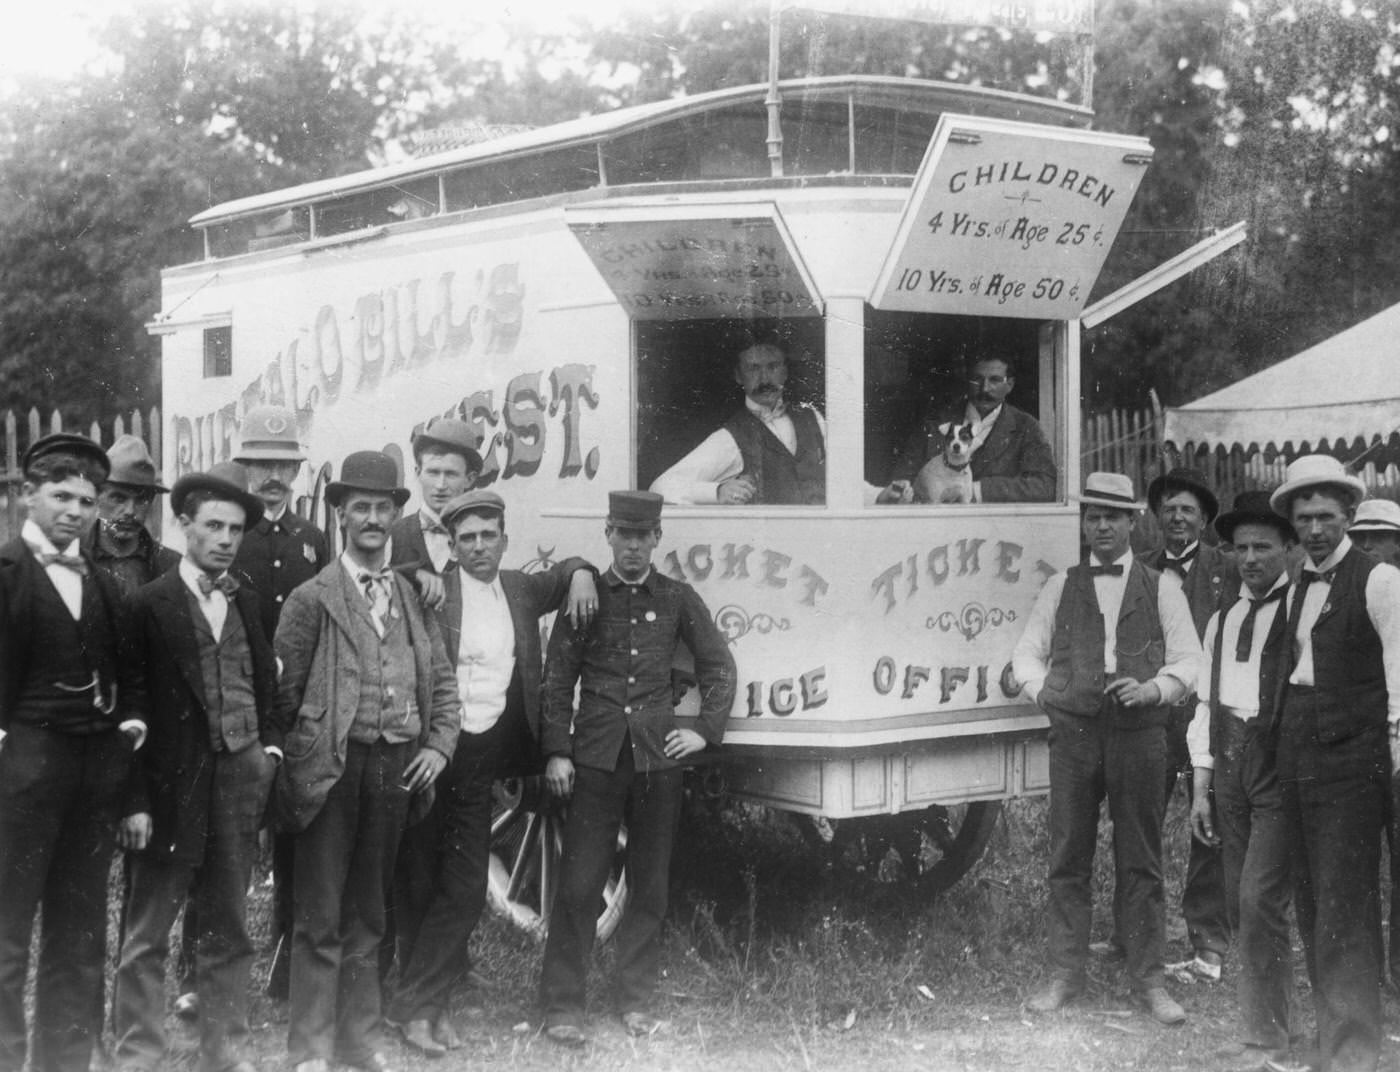 Selling the Wild West, circa 1890: Male employees gathered around a wagon that serves as the ticket office for the Buffalo Bill's Wild West show.